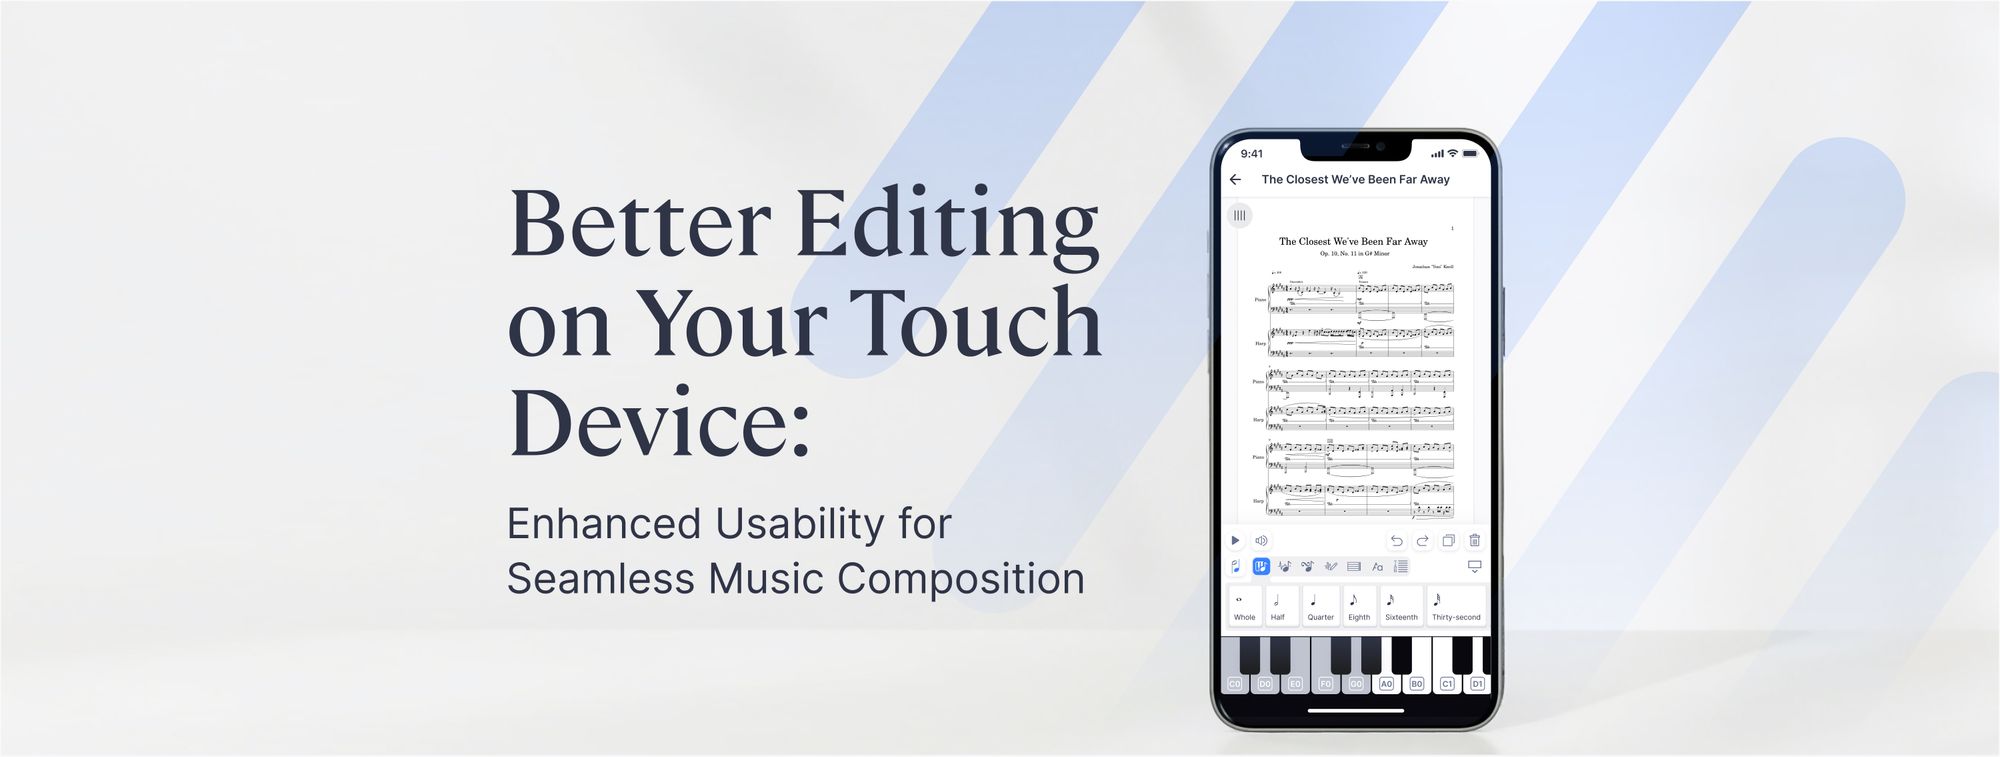 Better Editing on Your Touch Device: Enhanced Usability for Seamless Music Composition